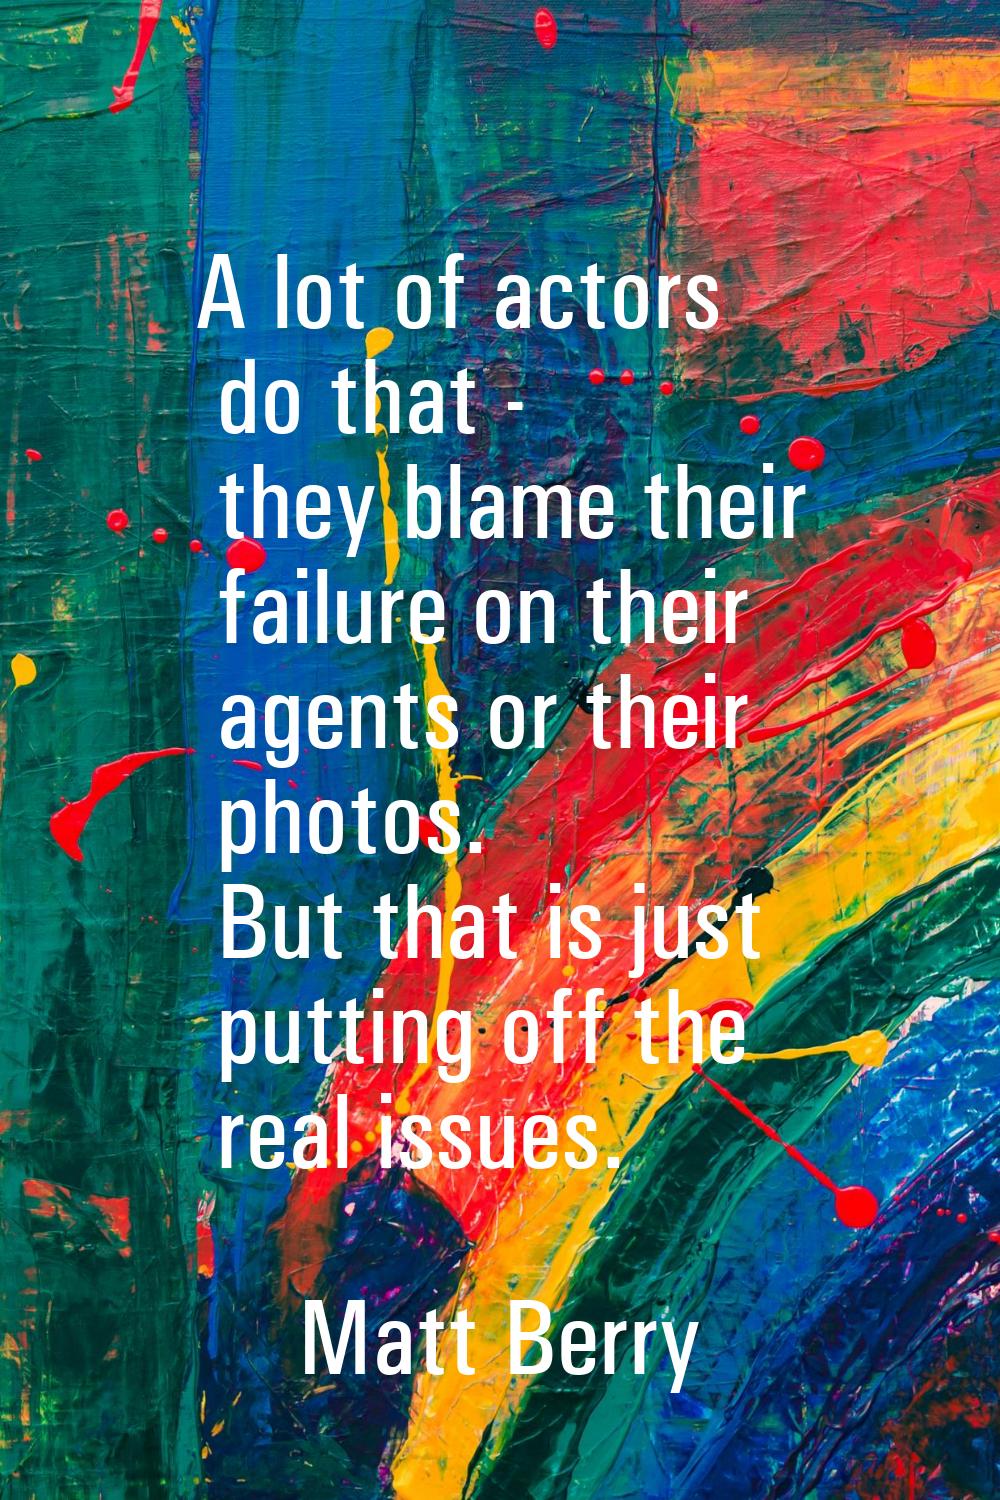 A lot of actors do that - they blame their failure on their agents or their photos. But that is jus